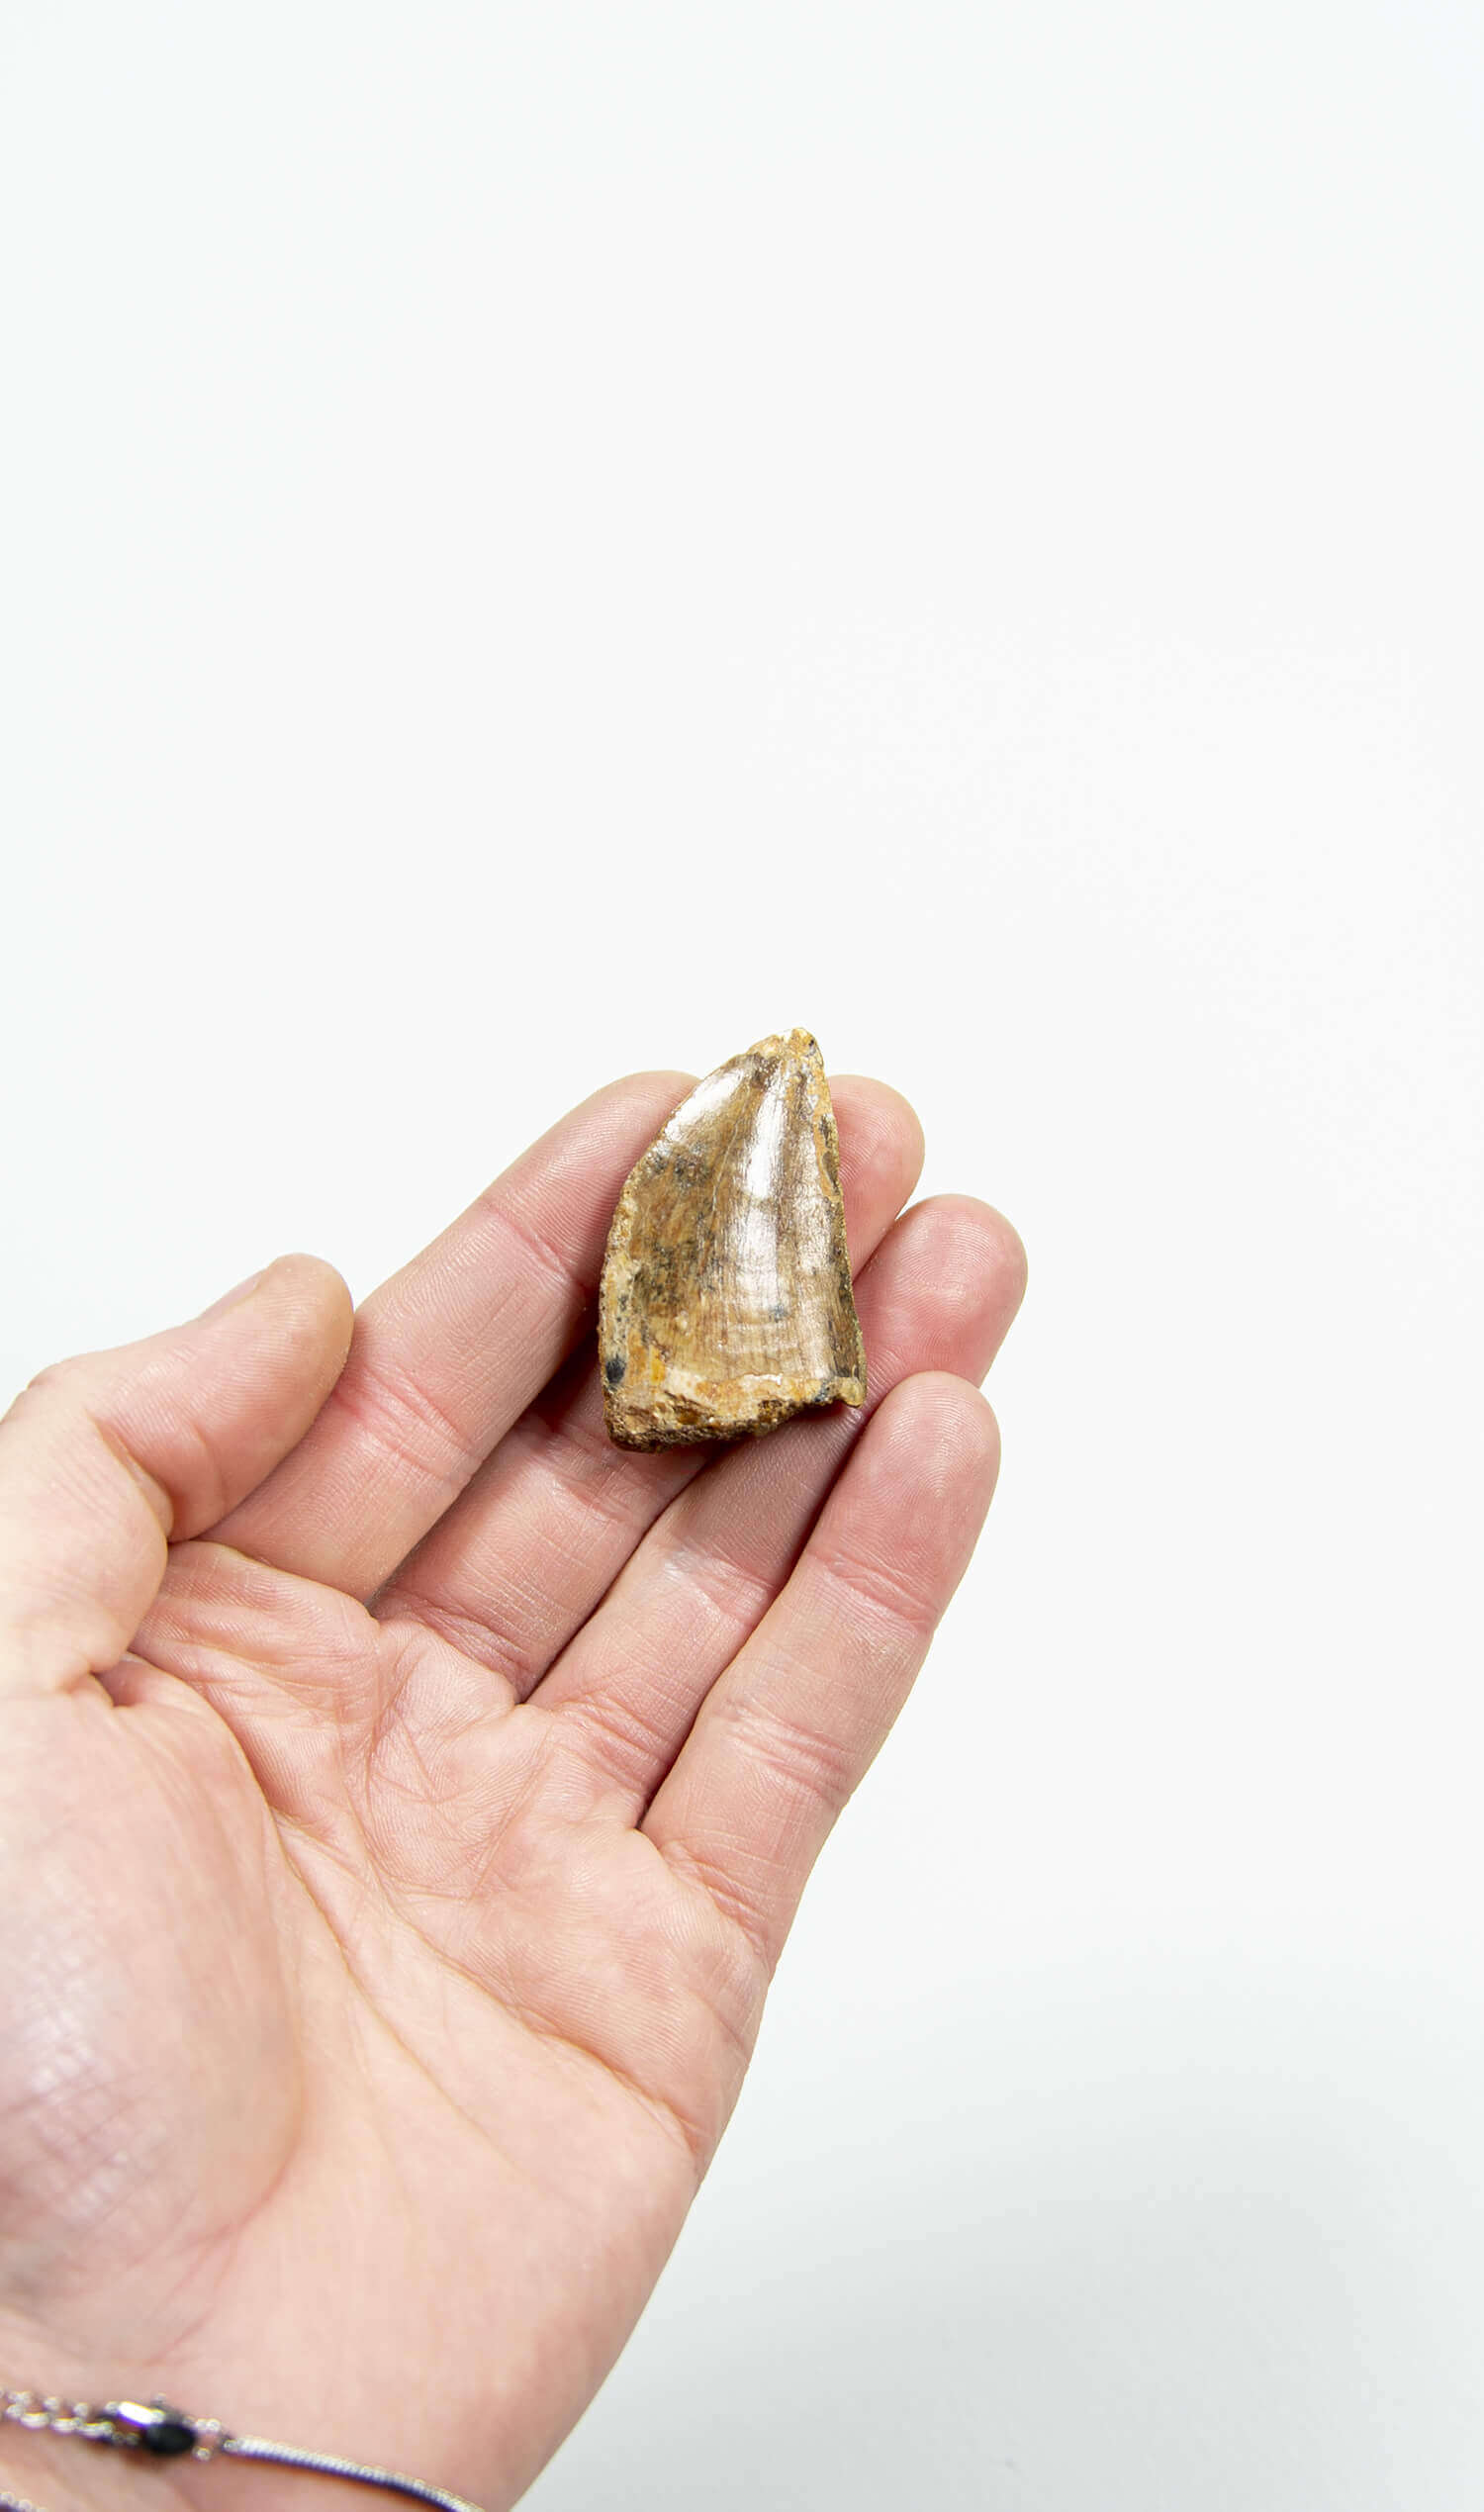 real fossil dinosaur carcharodontosaurus tooth for sale at the uk fossil store 58